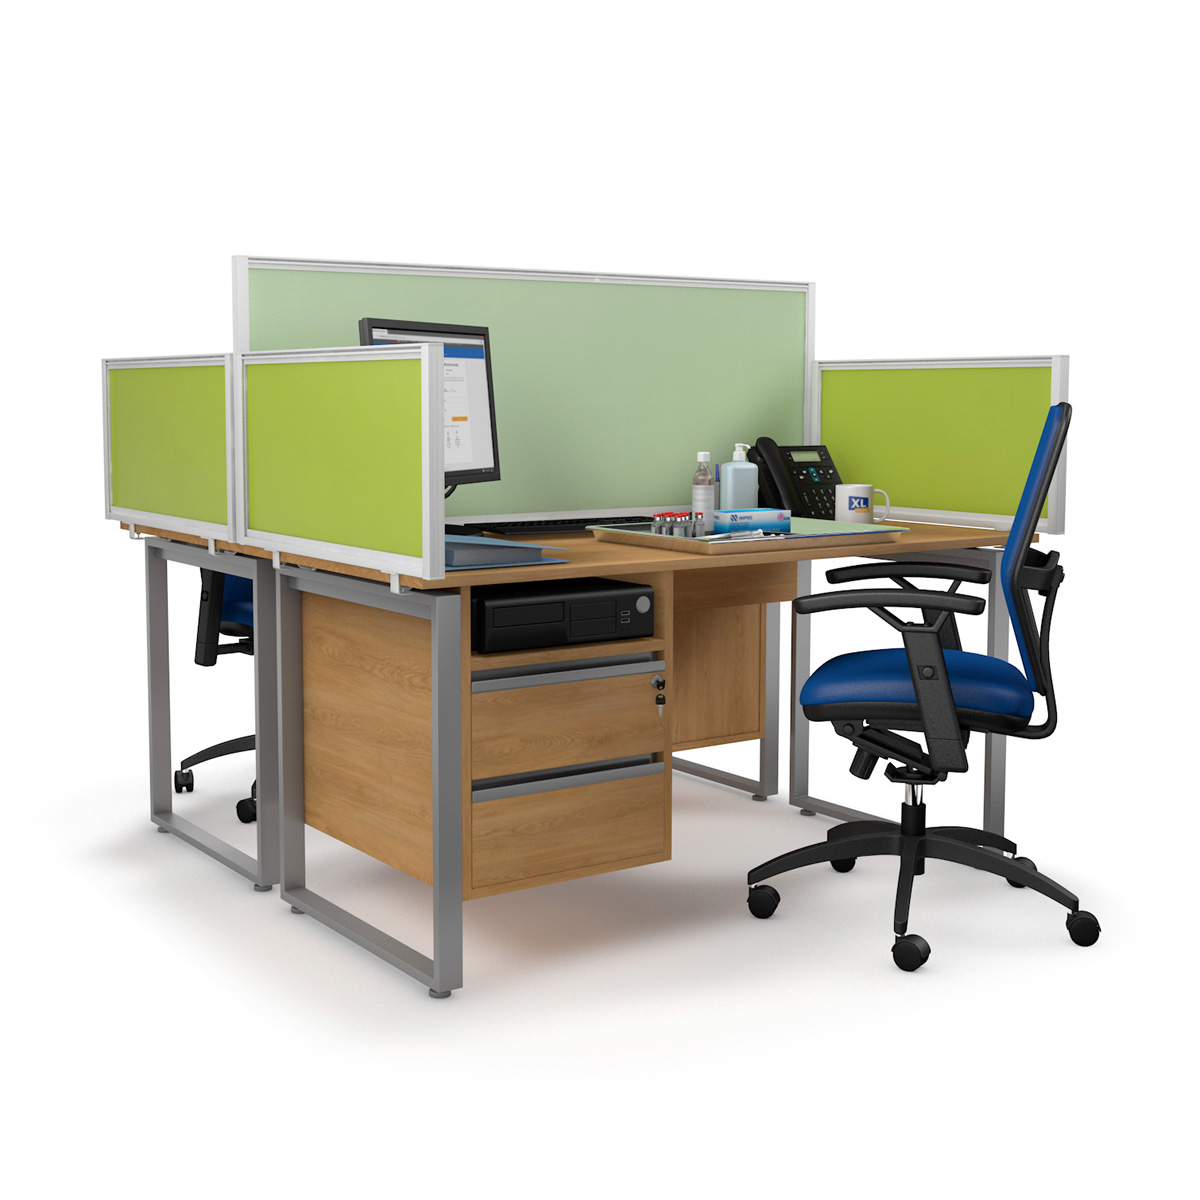 FRONTIER® Medical Screens Anti-Microbial Desk Dividers Can Be Used To Shield Staff And Patients 